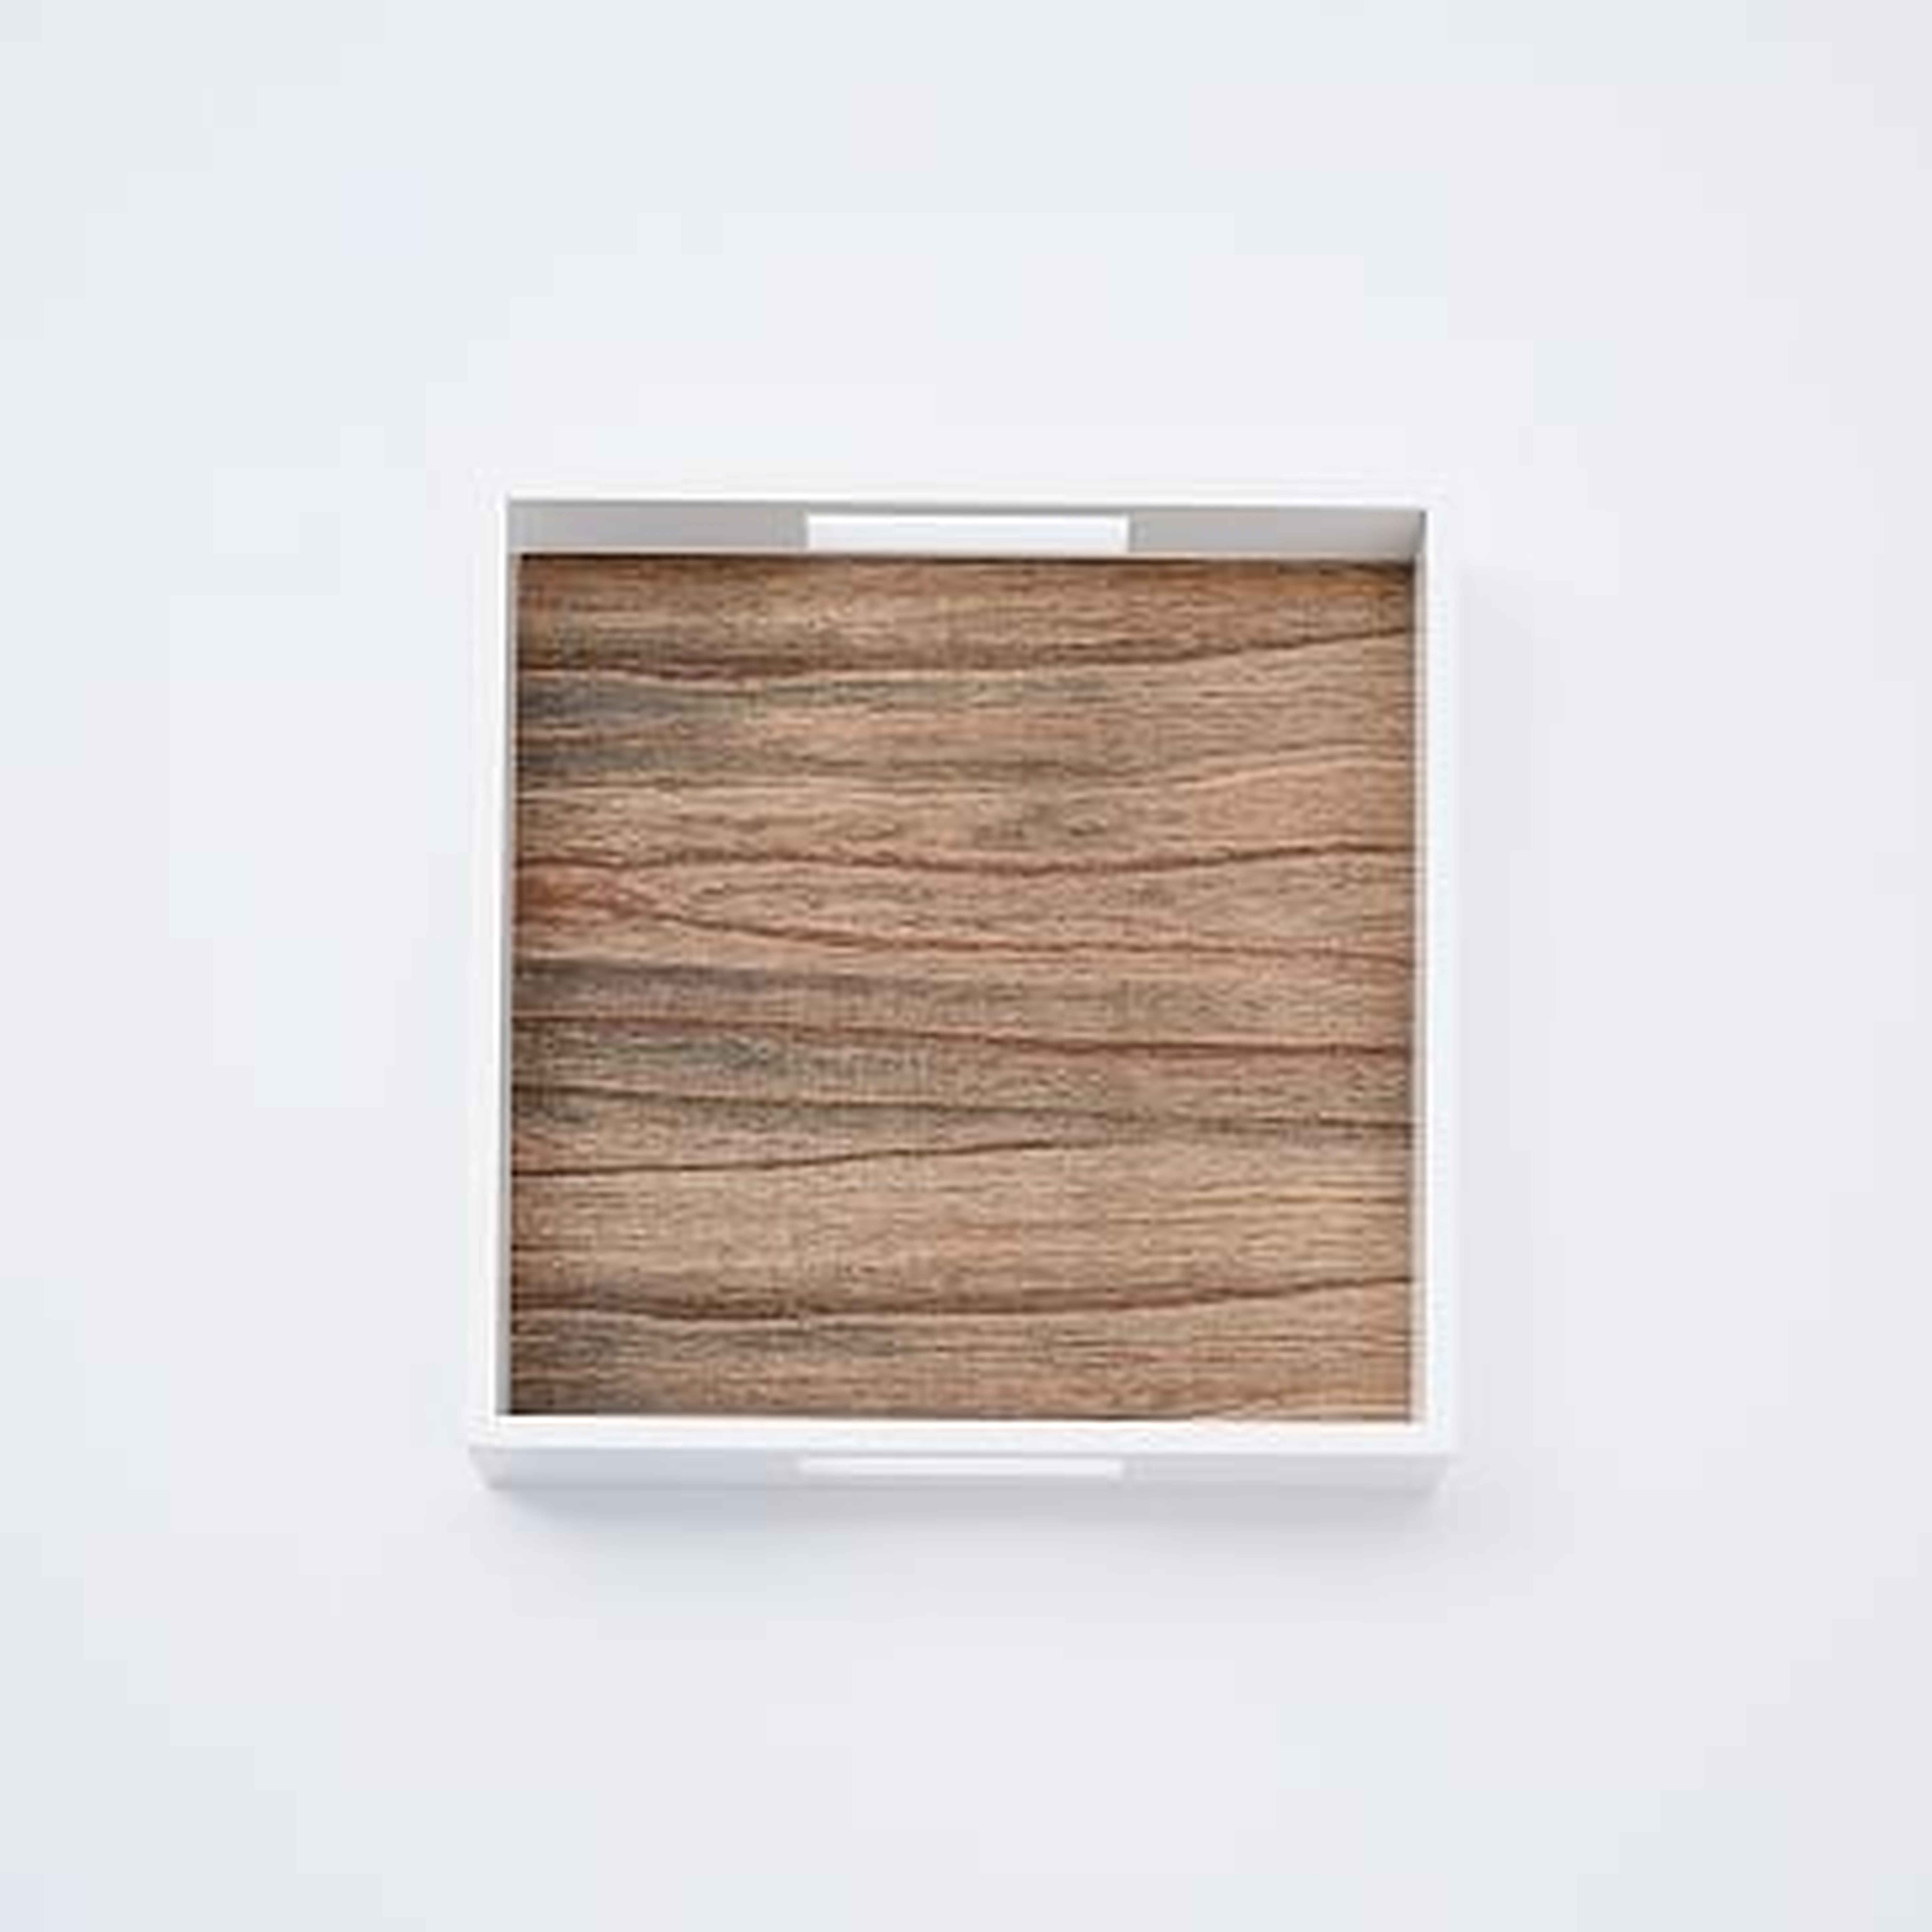 Reclaimed Wood Lacquer Tray, White/Wood, 12"x12" - West Elm